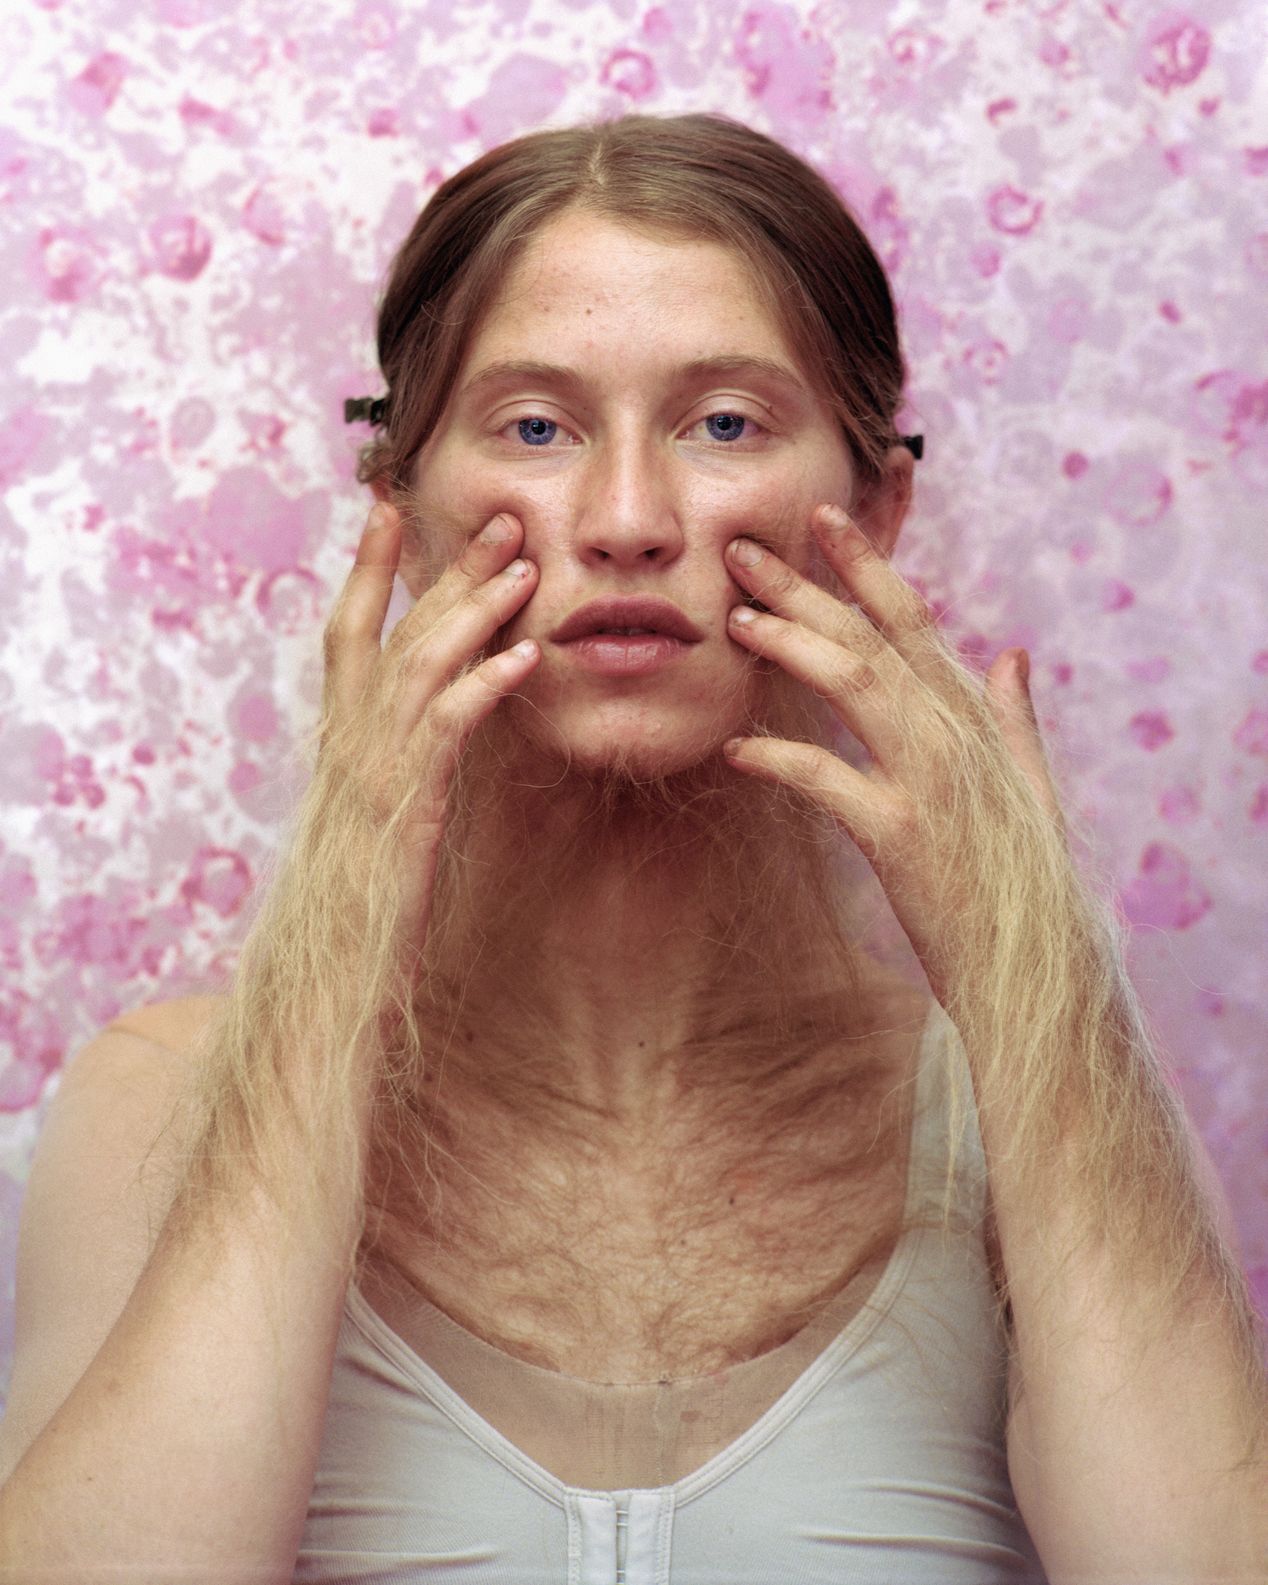 A young woman touching her cheeks with furry hands, art photography, Ilona Szwarc, contemporary Los Angeles artist.